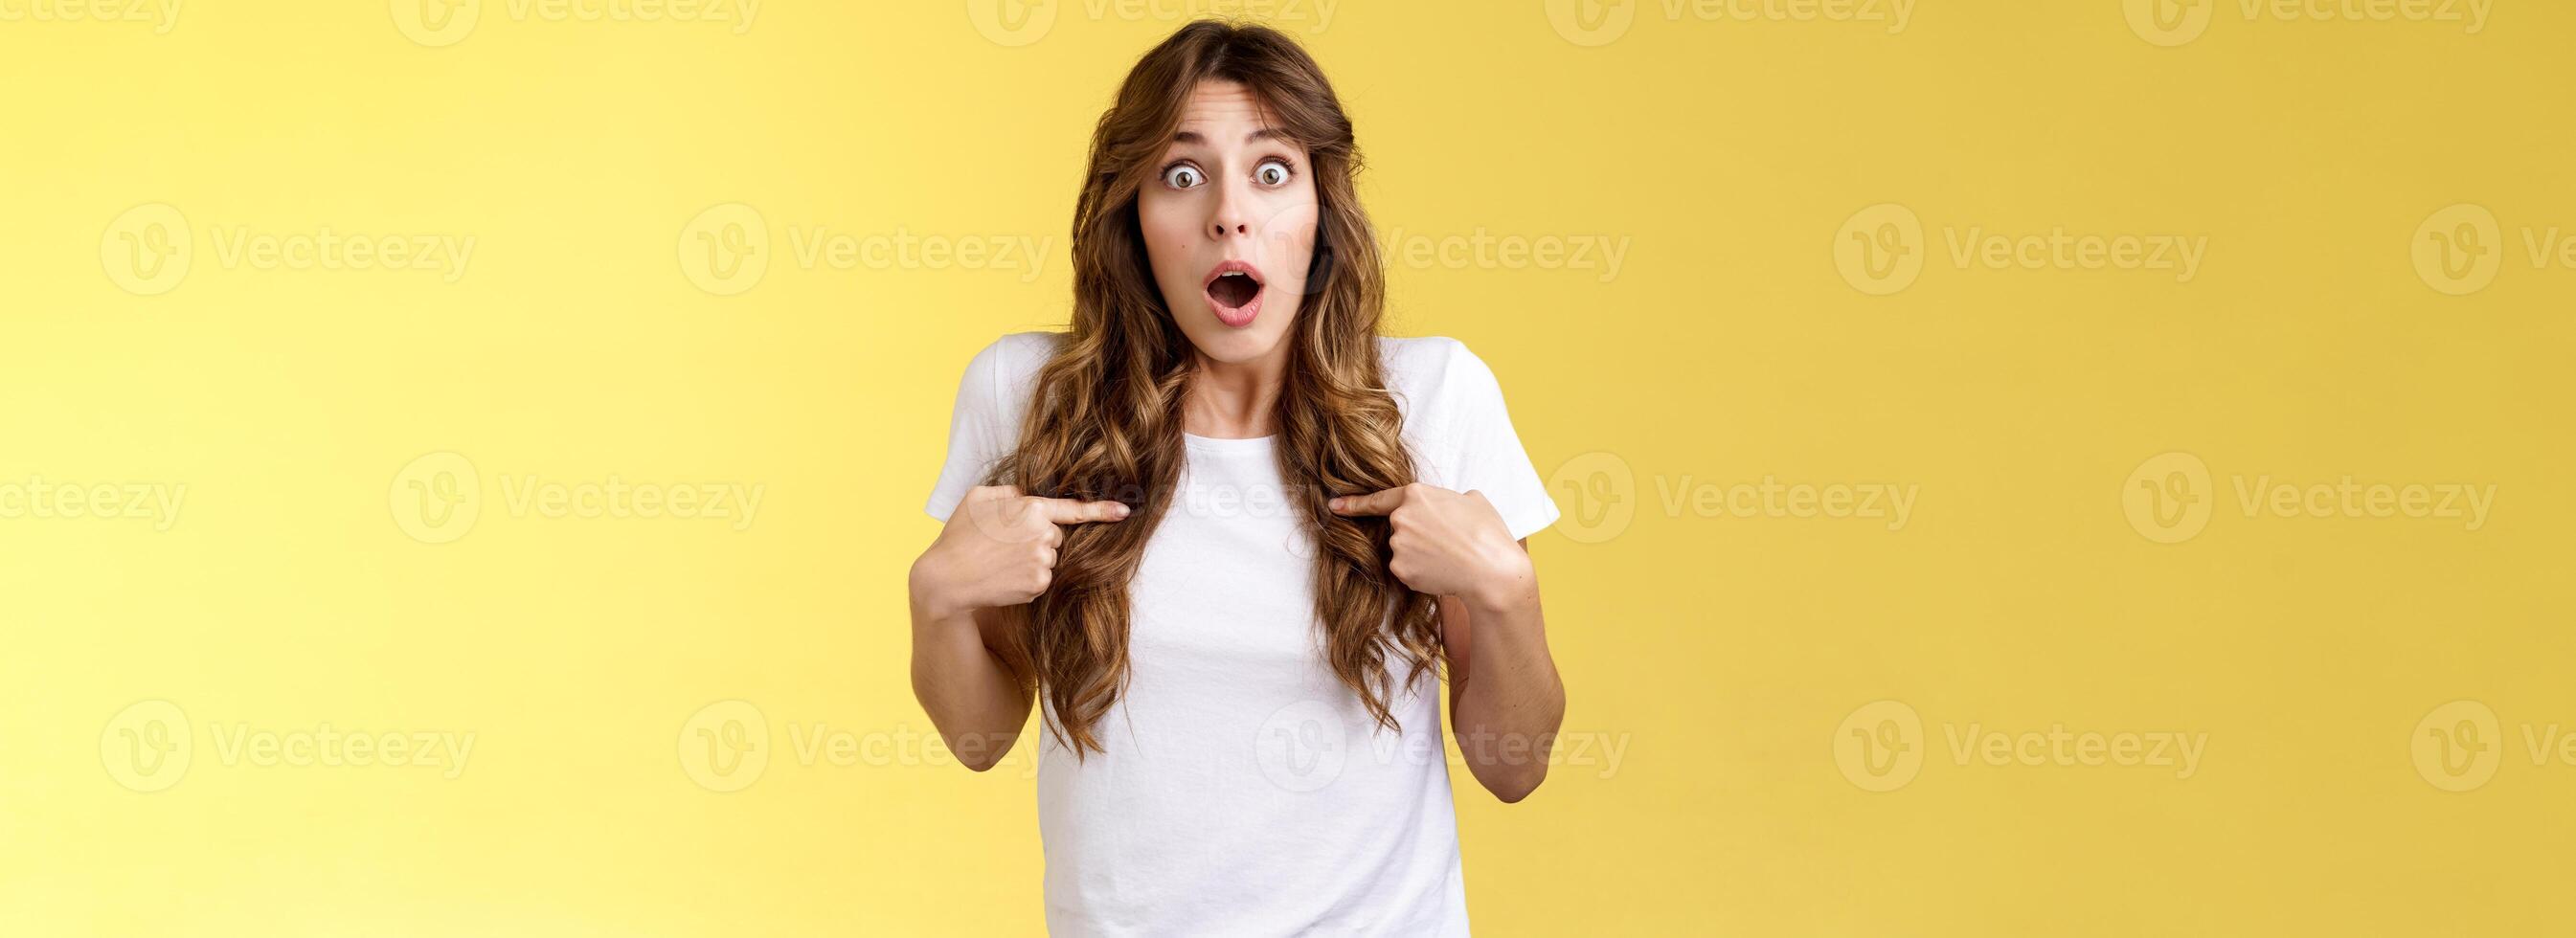 Shocked impressed speechless surprised girl gasping drop jaw pointing herself chest stare camera astonished unexpected promotion being chosen picked winning lottery stand yellow background photo